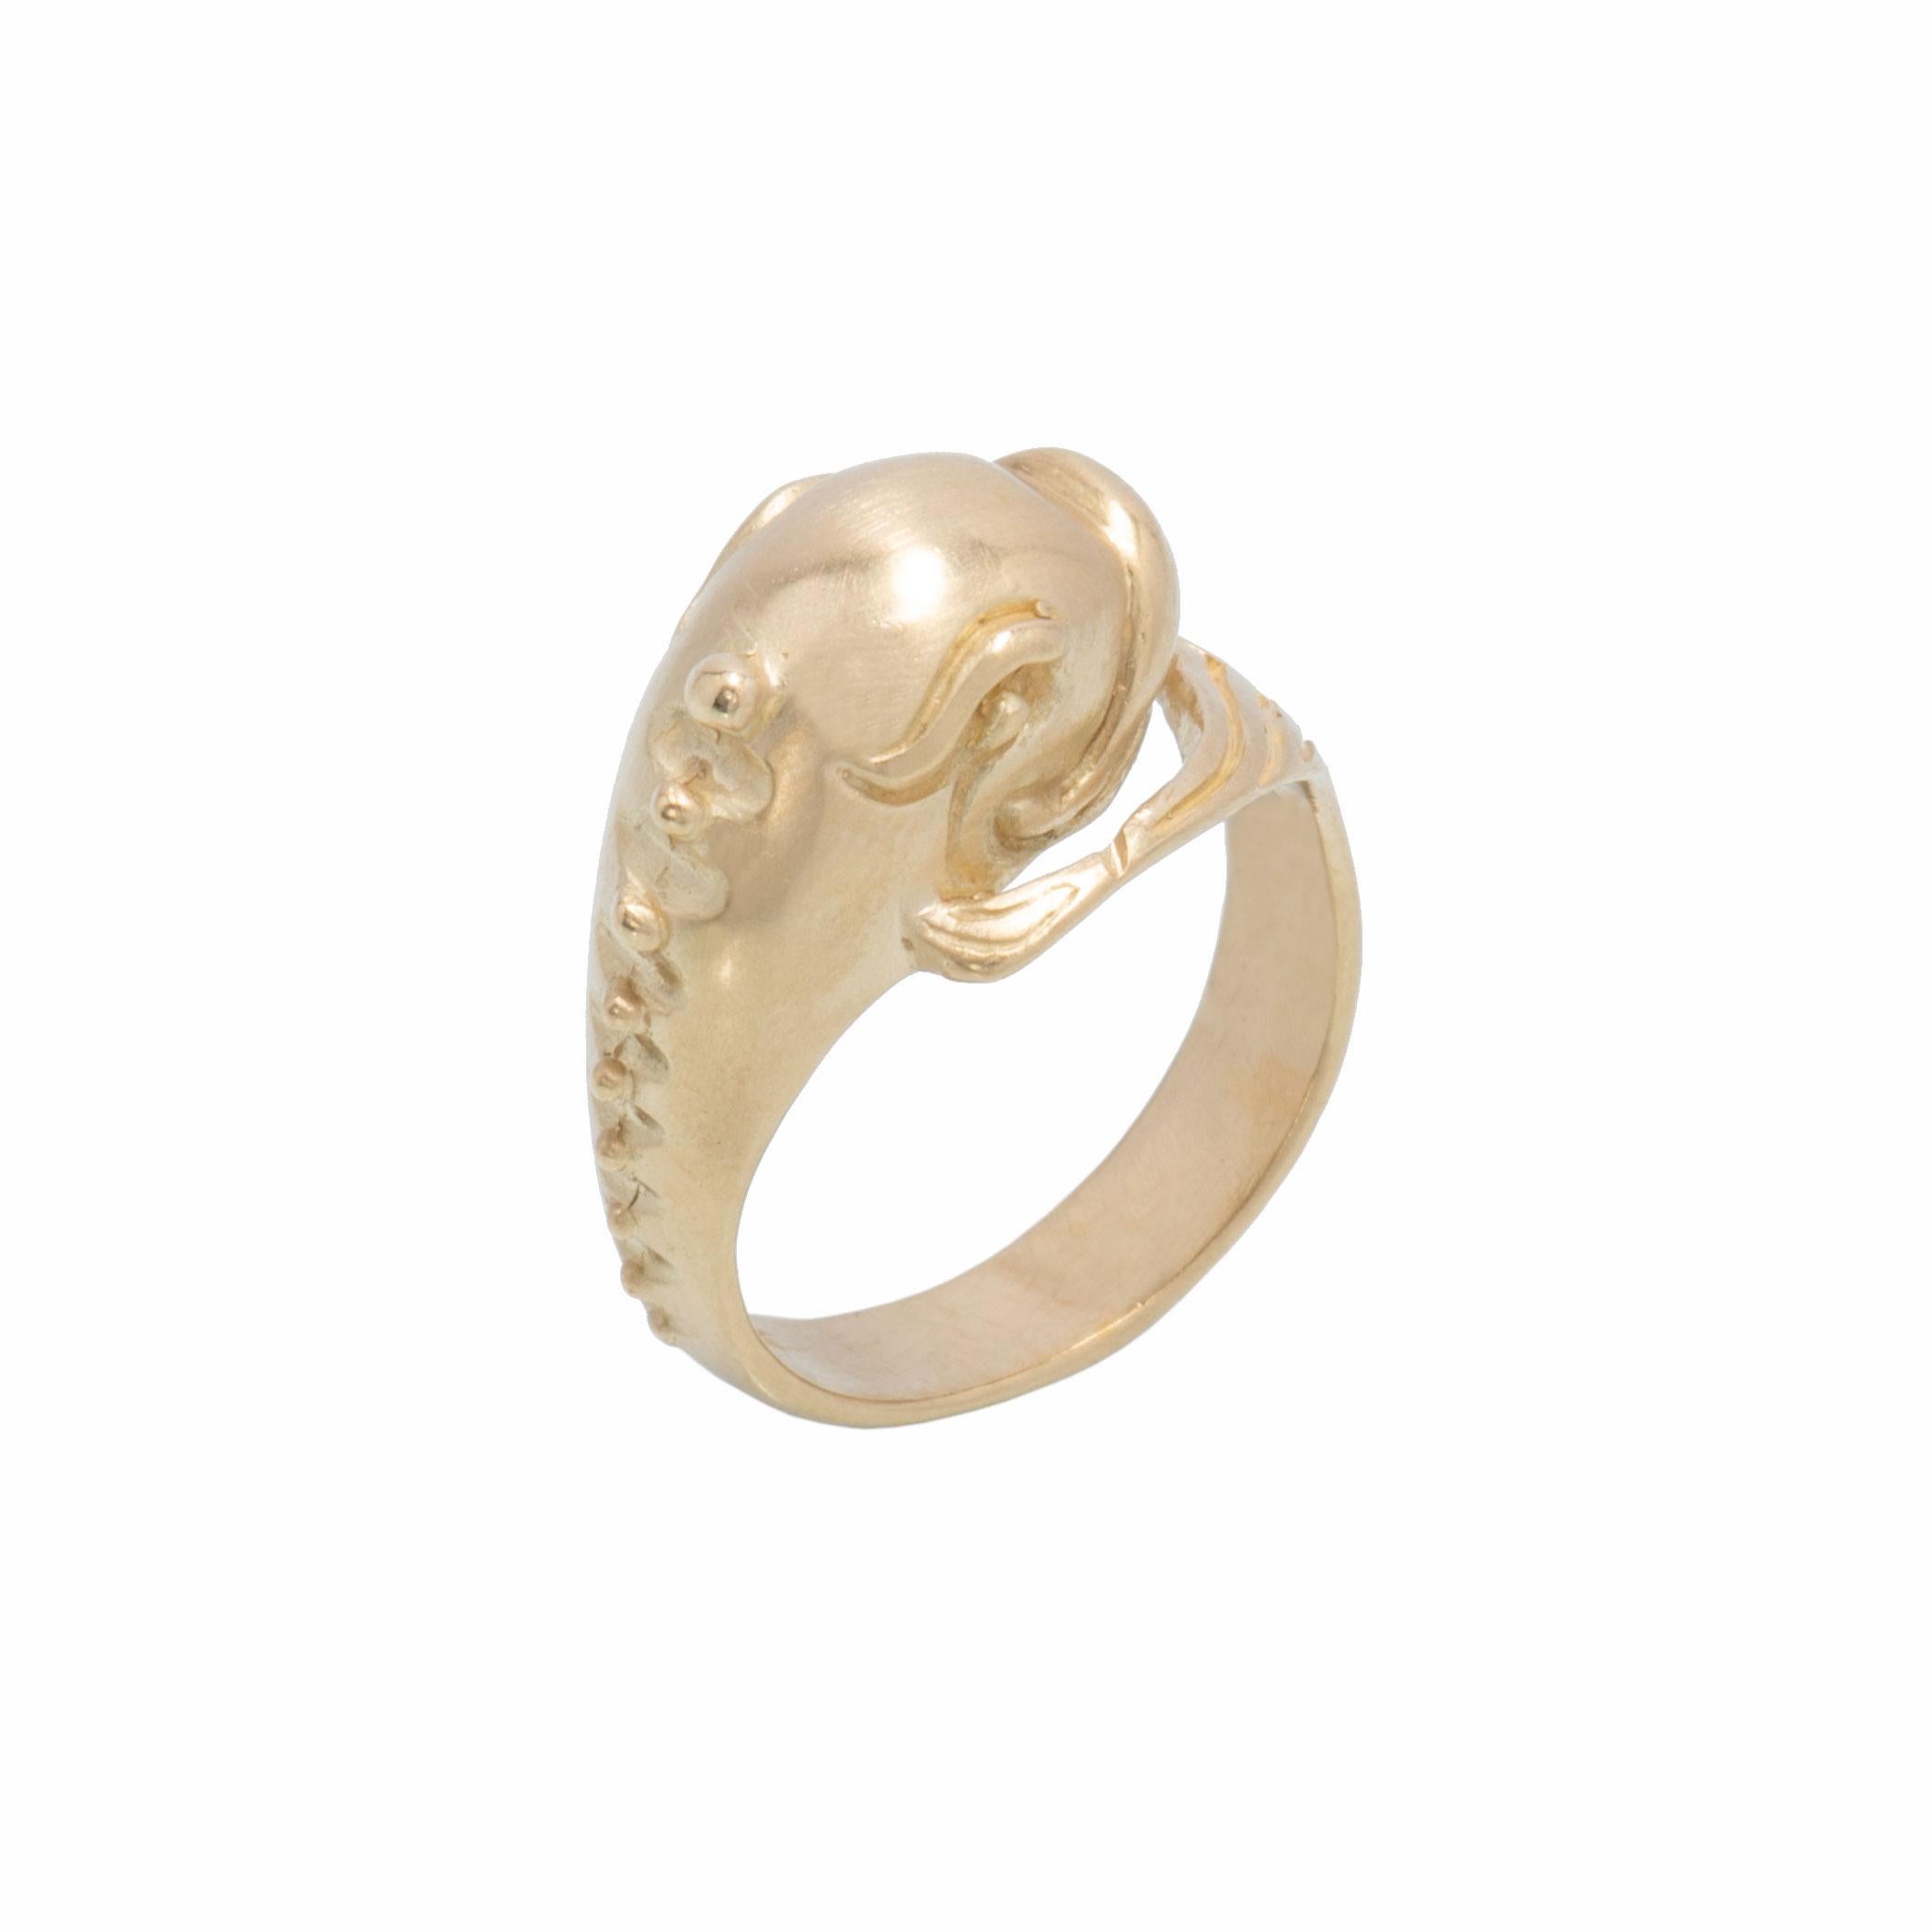 Our Dolphin Ring in 18 karat gold harkens back to ancient times when the dolphin was revered as the messenger of Poseidon or Neptune, the god of the seas. Mythological tales abound of ships guided through narrow straits by dolphins, sailors rescued